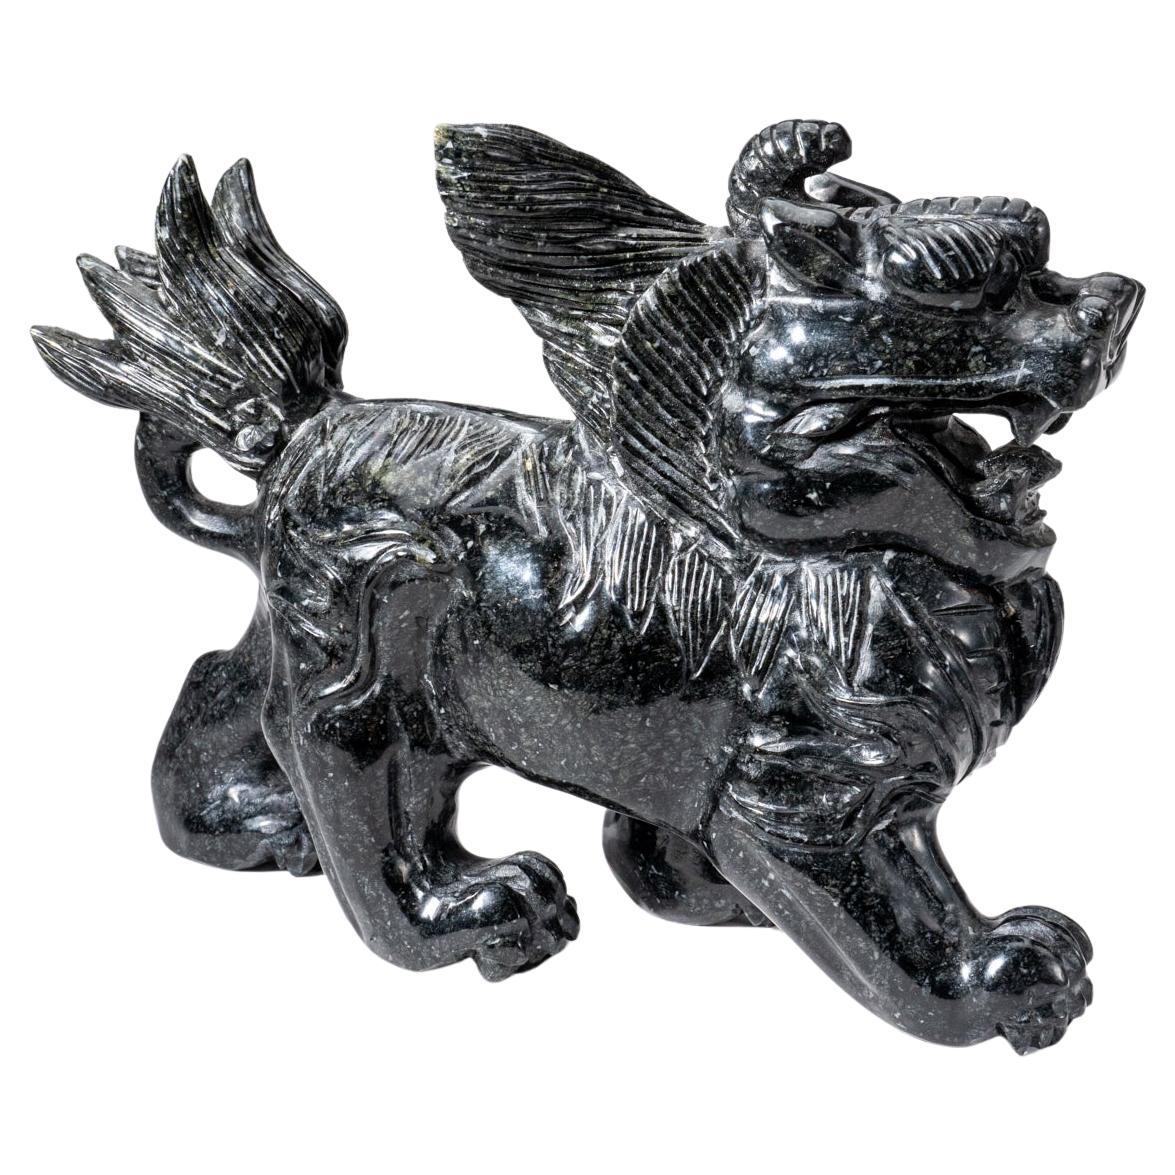 Large hand carving of Chinese Foo Dog. This piece is hand carved from a solid piece of Nephrite Jade that hand polished to a mirror finish. This jade is all natural, with a vibrant hunter green color. A perfect addition to any interior! Guardian